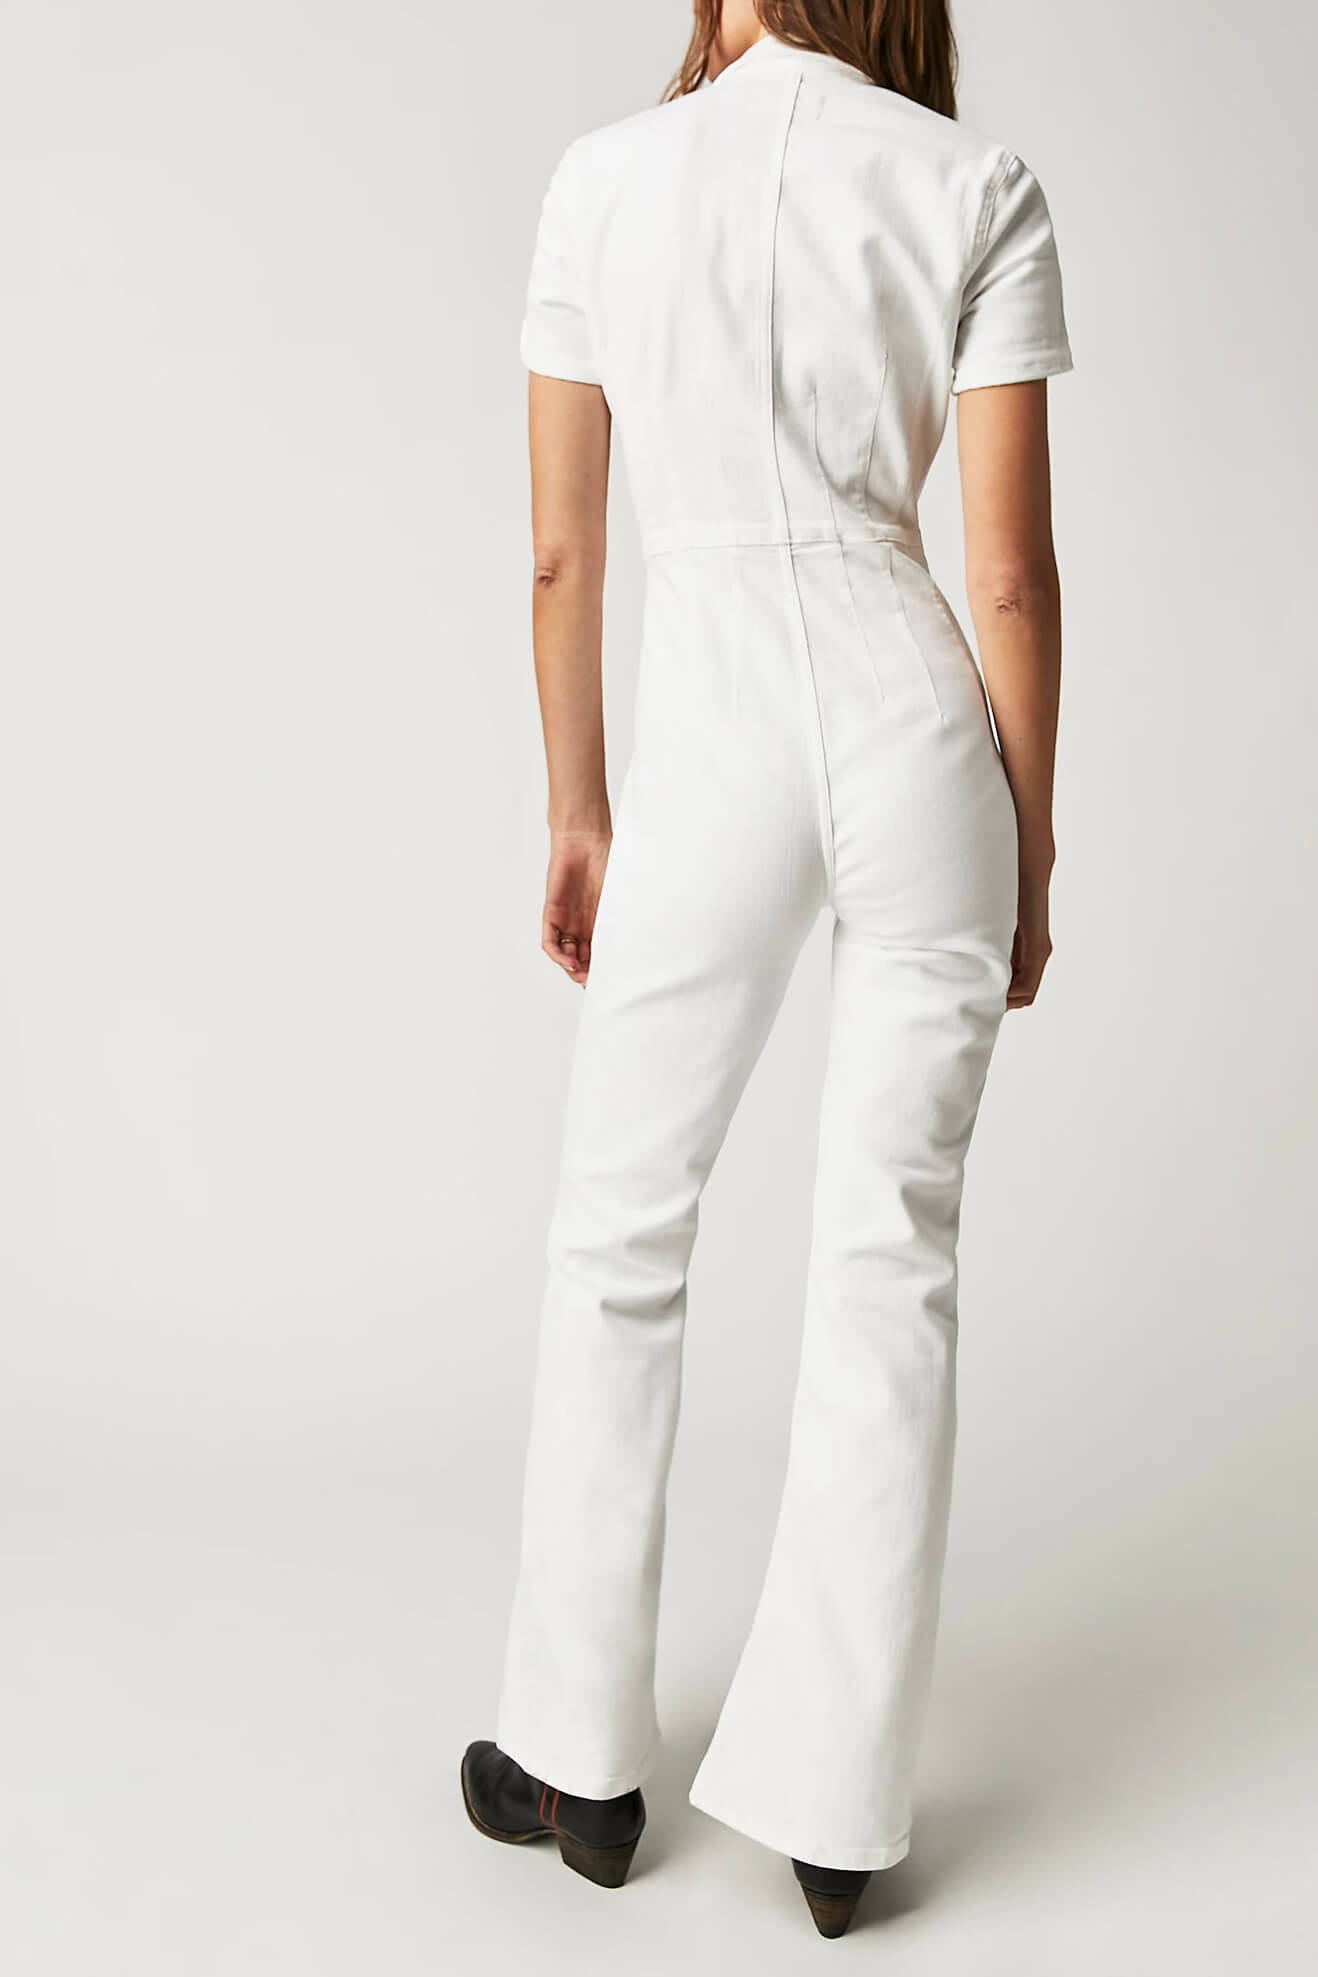 Free People jayde flare jumpsuit in pure white